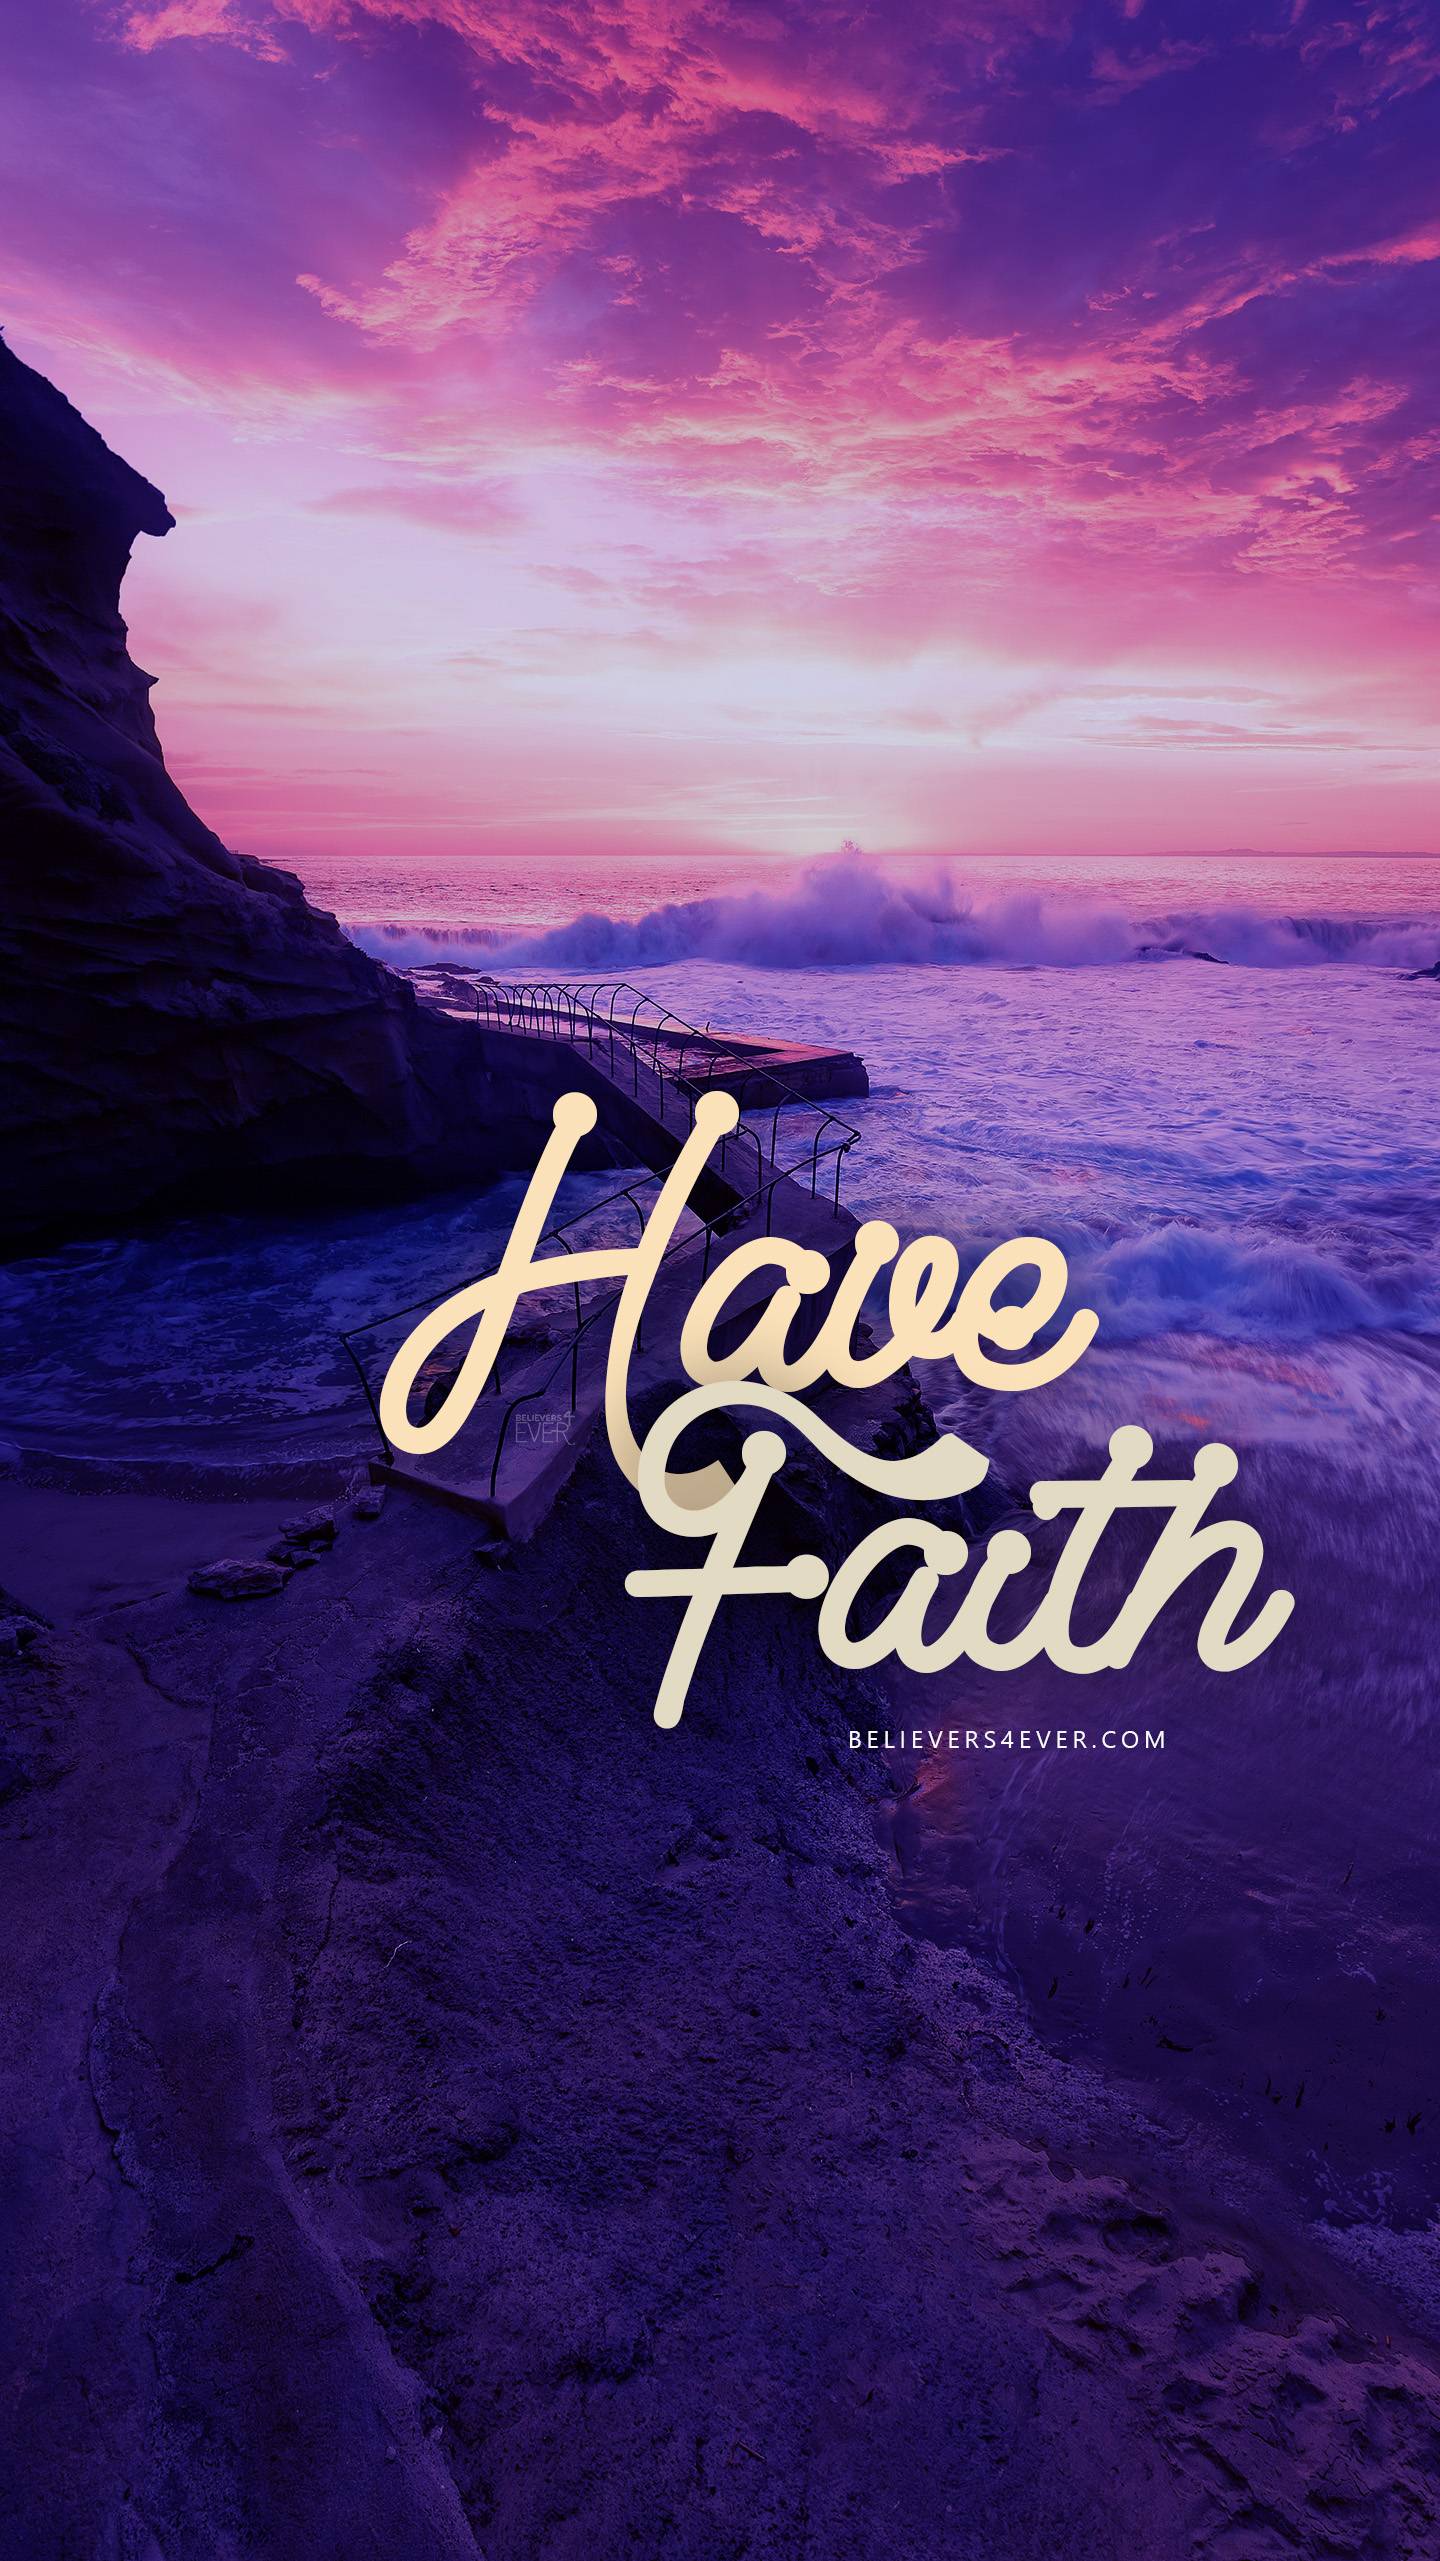 10 Inspiring Christian Wallpaper  Bible Verse Backgrounds For Your Phone